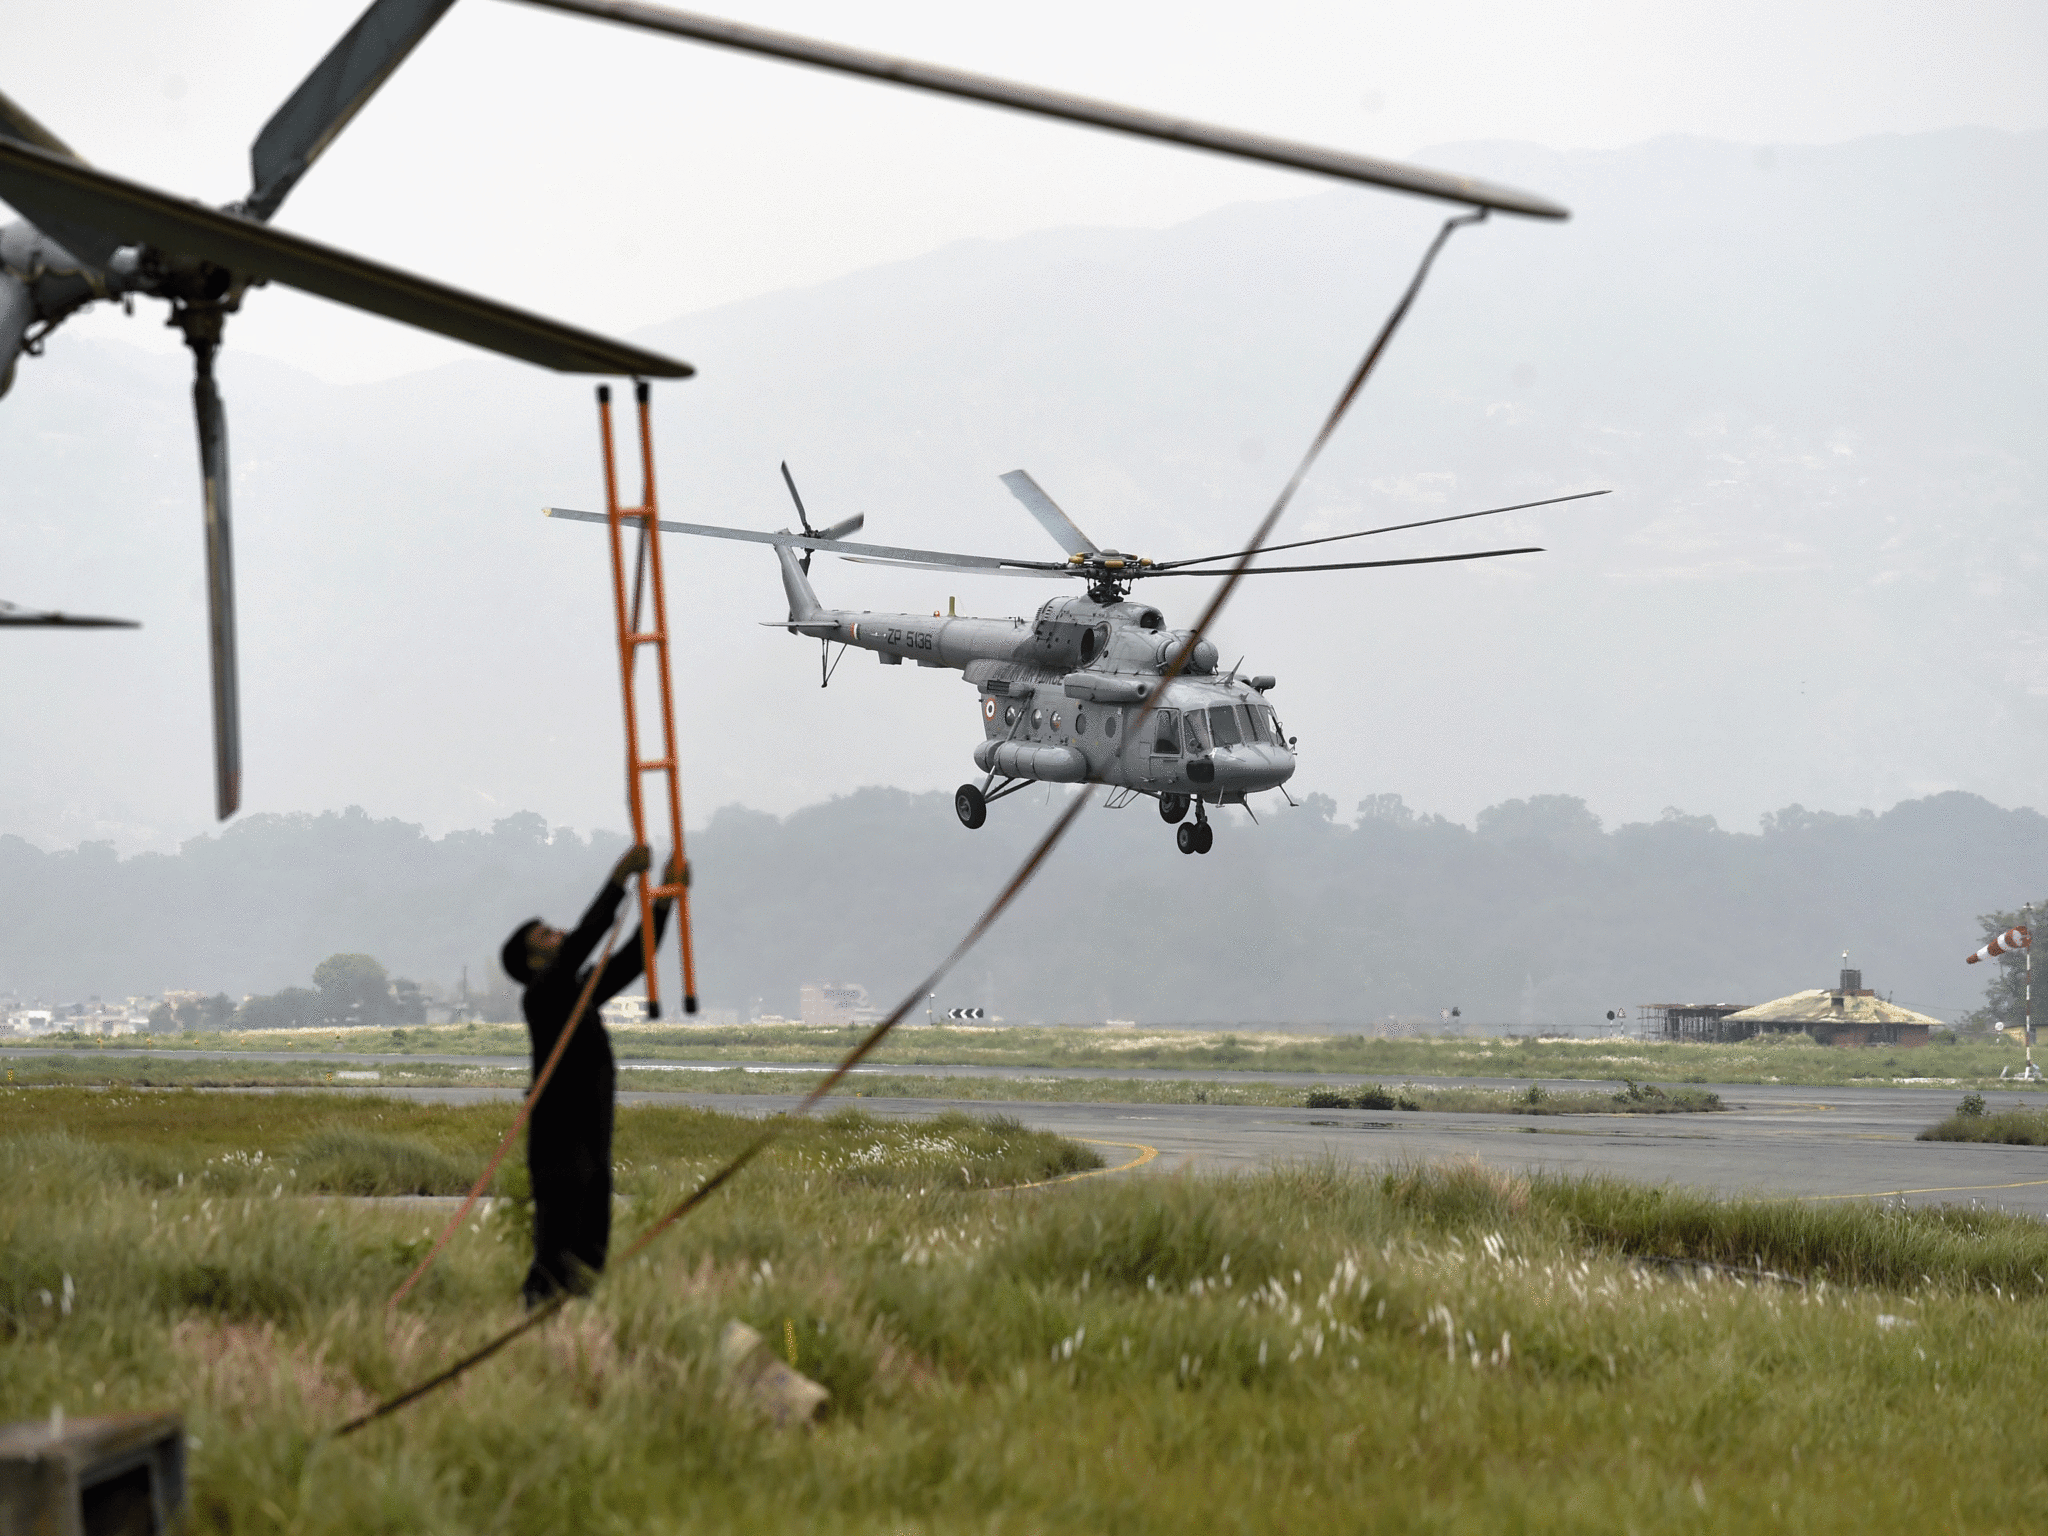 Nepal earthquake: Bodies and wreckage found after US helicopter crash